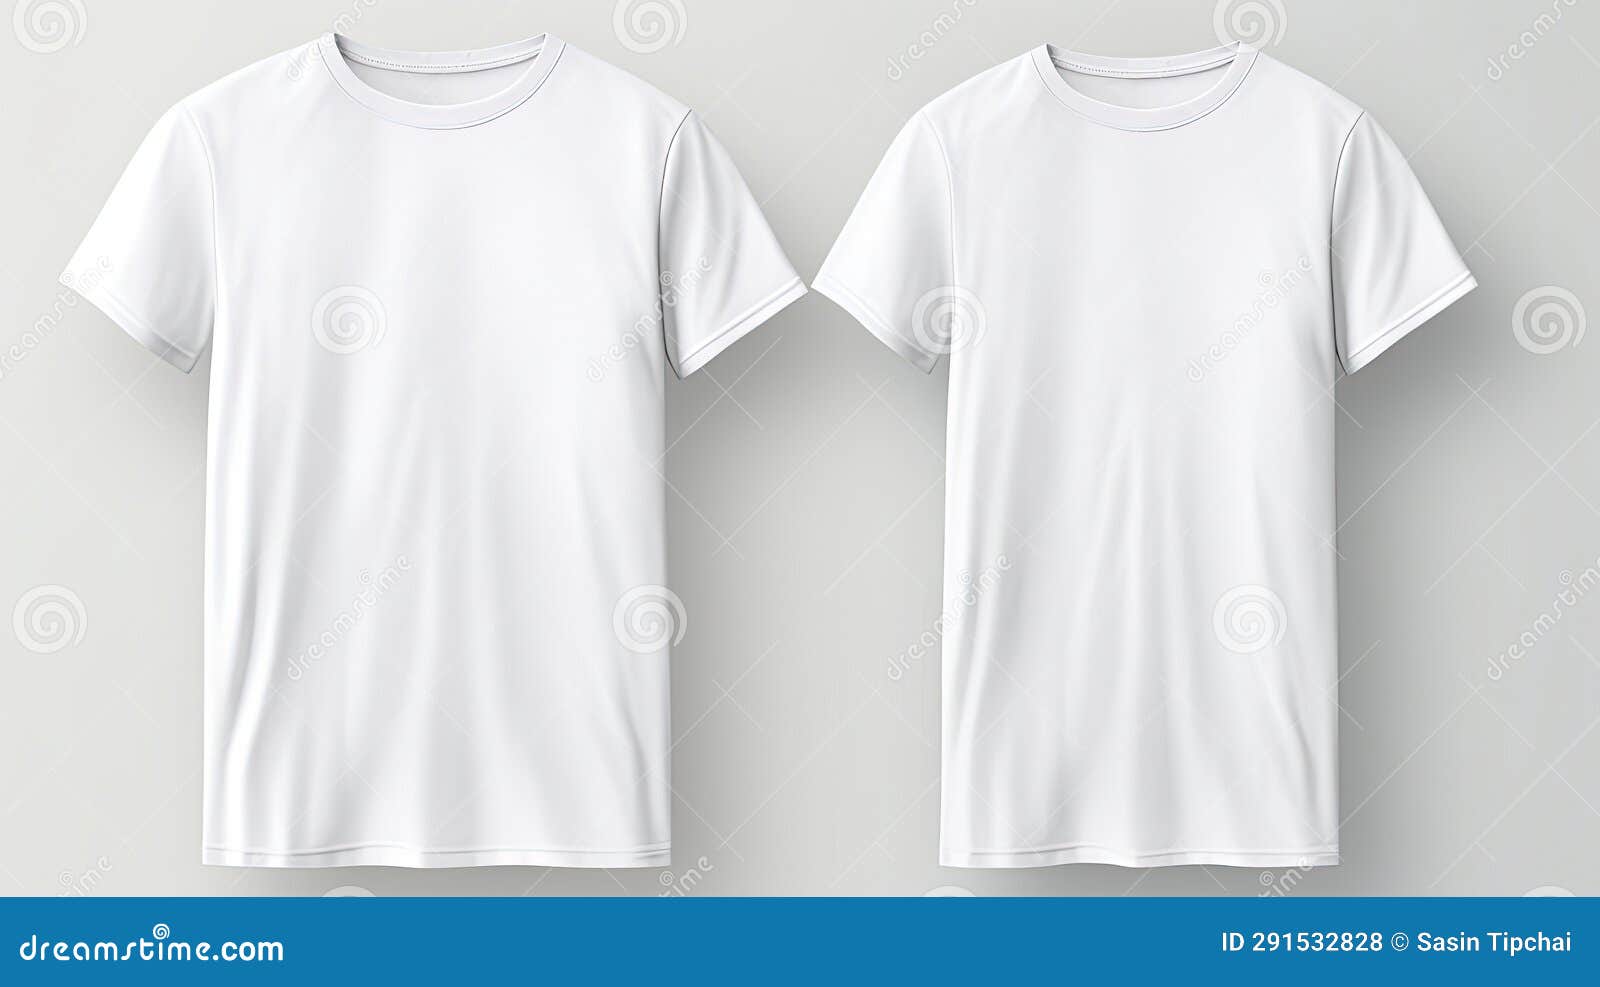 White T-shirt Mockup Hanging Realistic, Template Design Stock ...